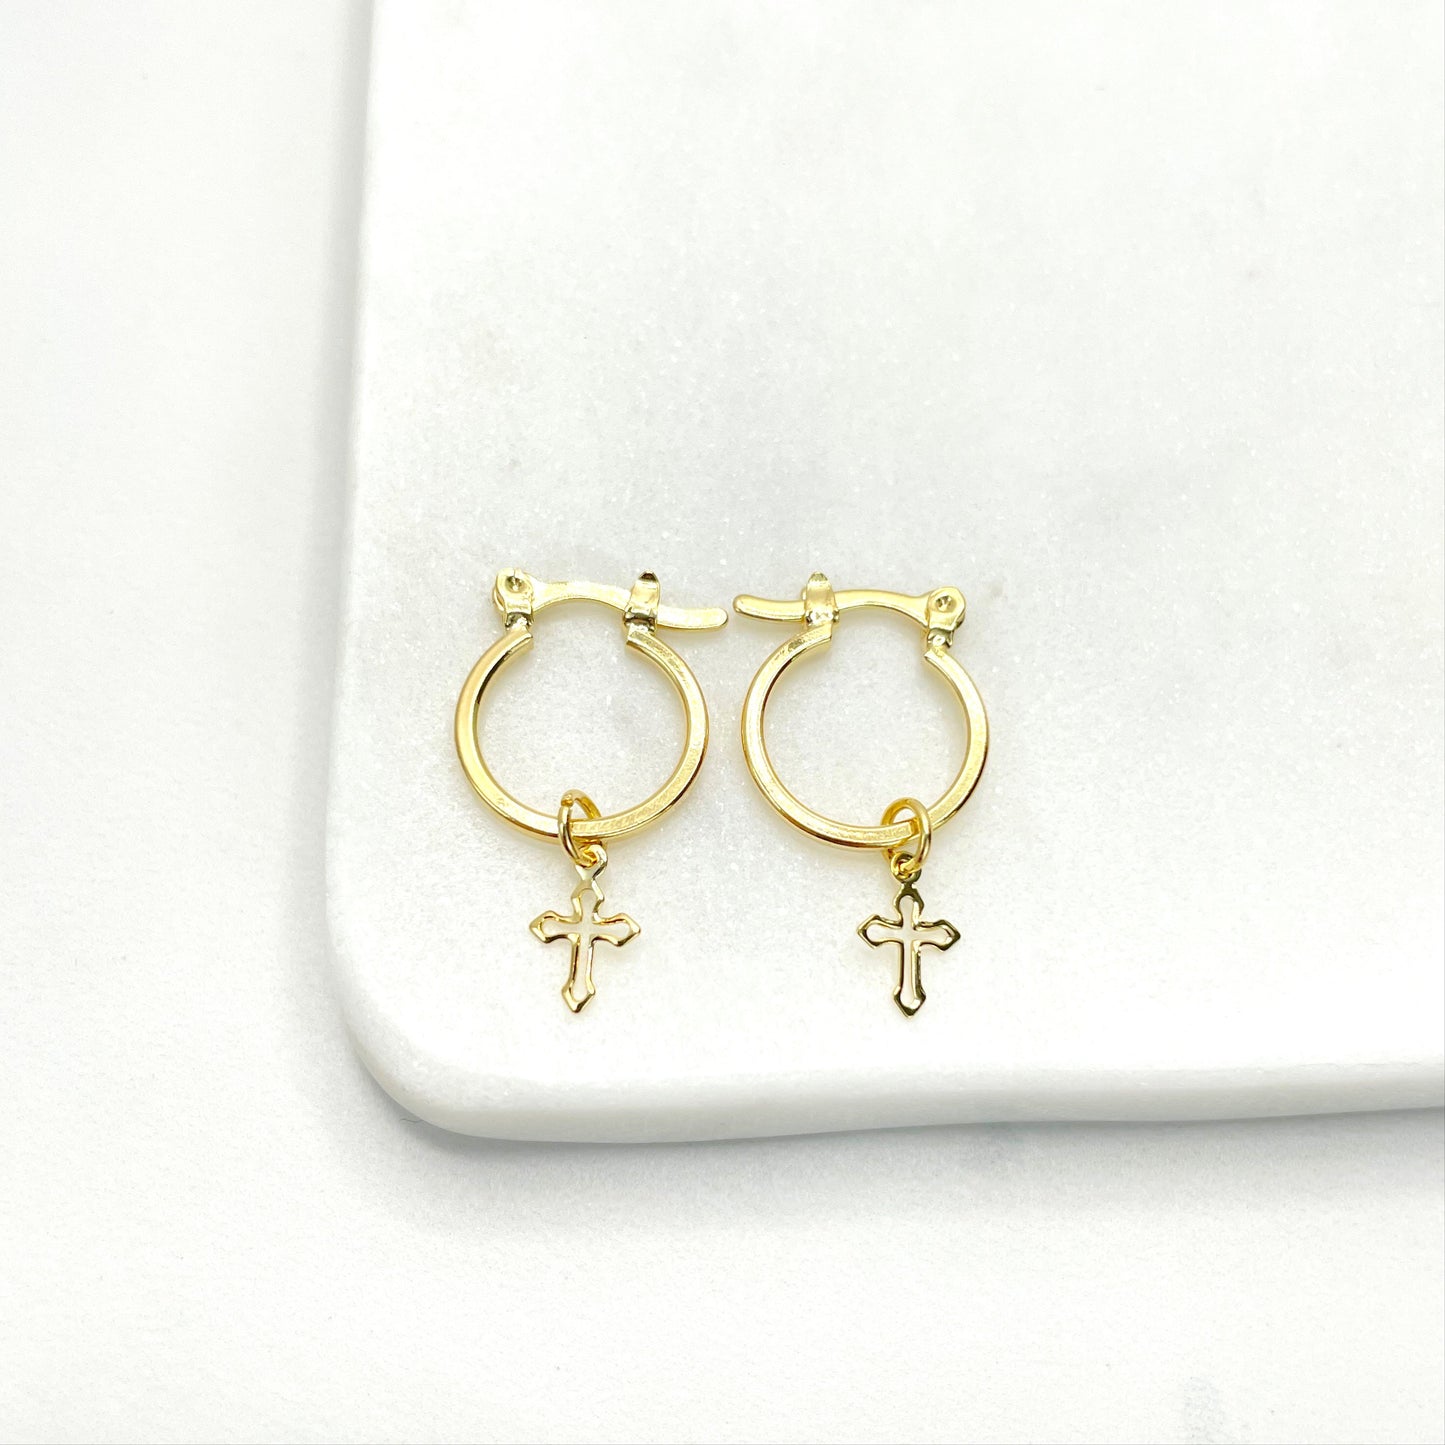 18k Gold Filled 14mm Hoop Earrings with Cutout Cross Charms Wholesale Jewelry Making Supplies